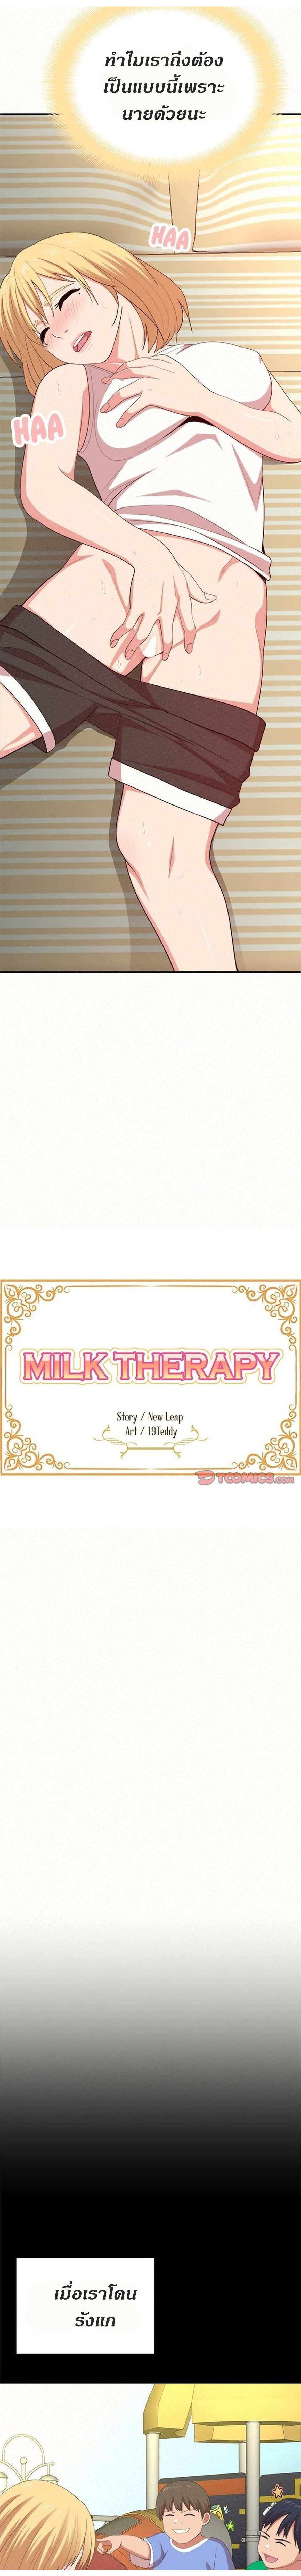 Milk Therapy 10 (3)